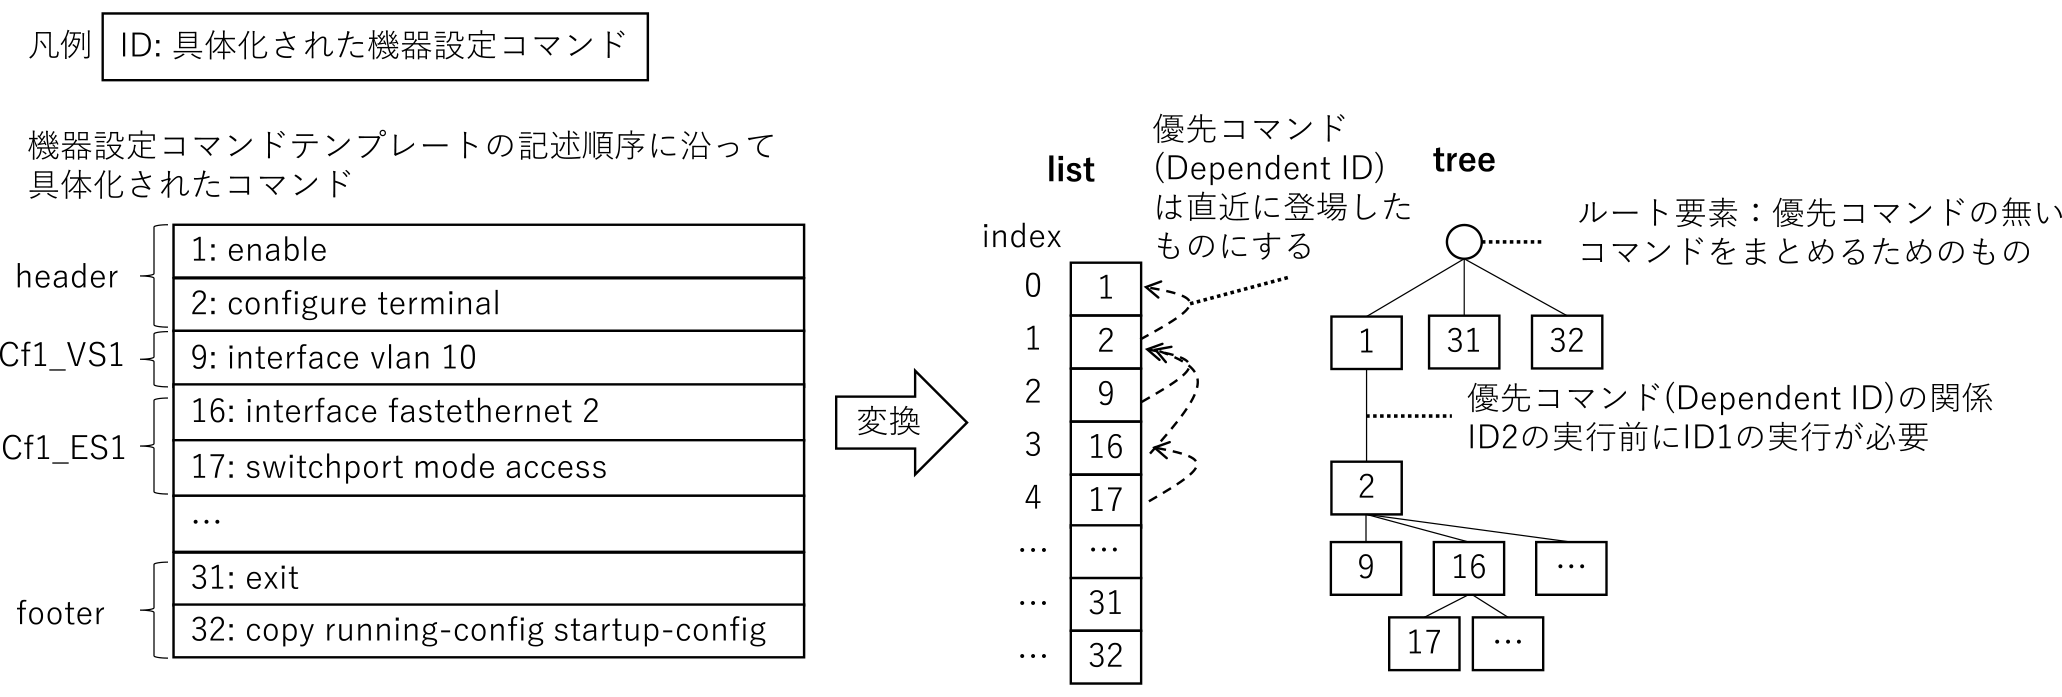 header,template,footerコマンドの整理　Processing of header, template, and footer commands